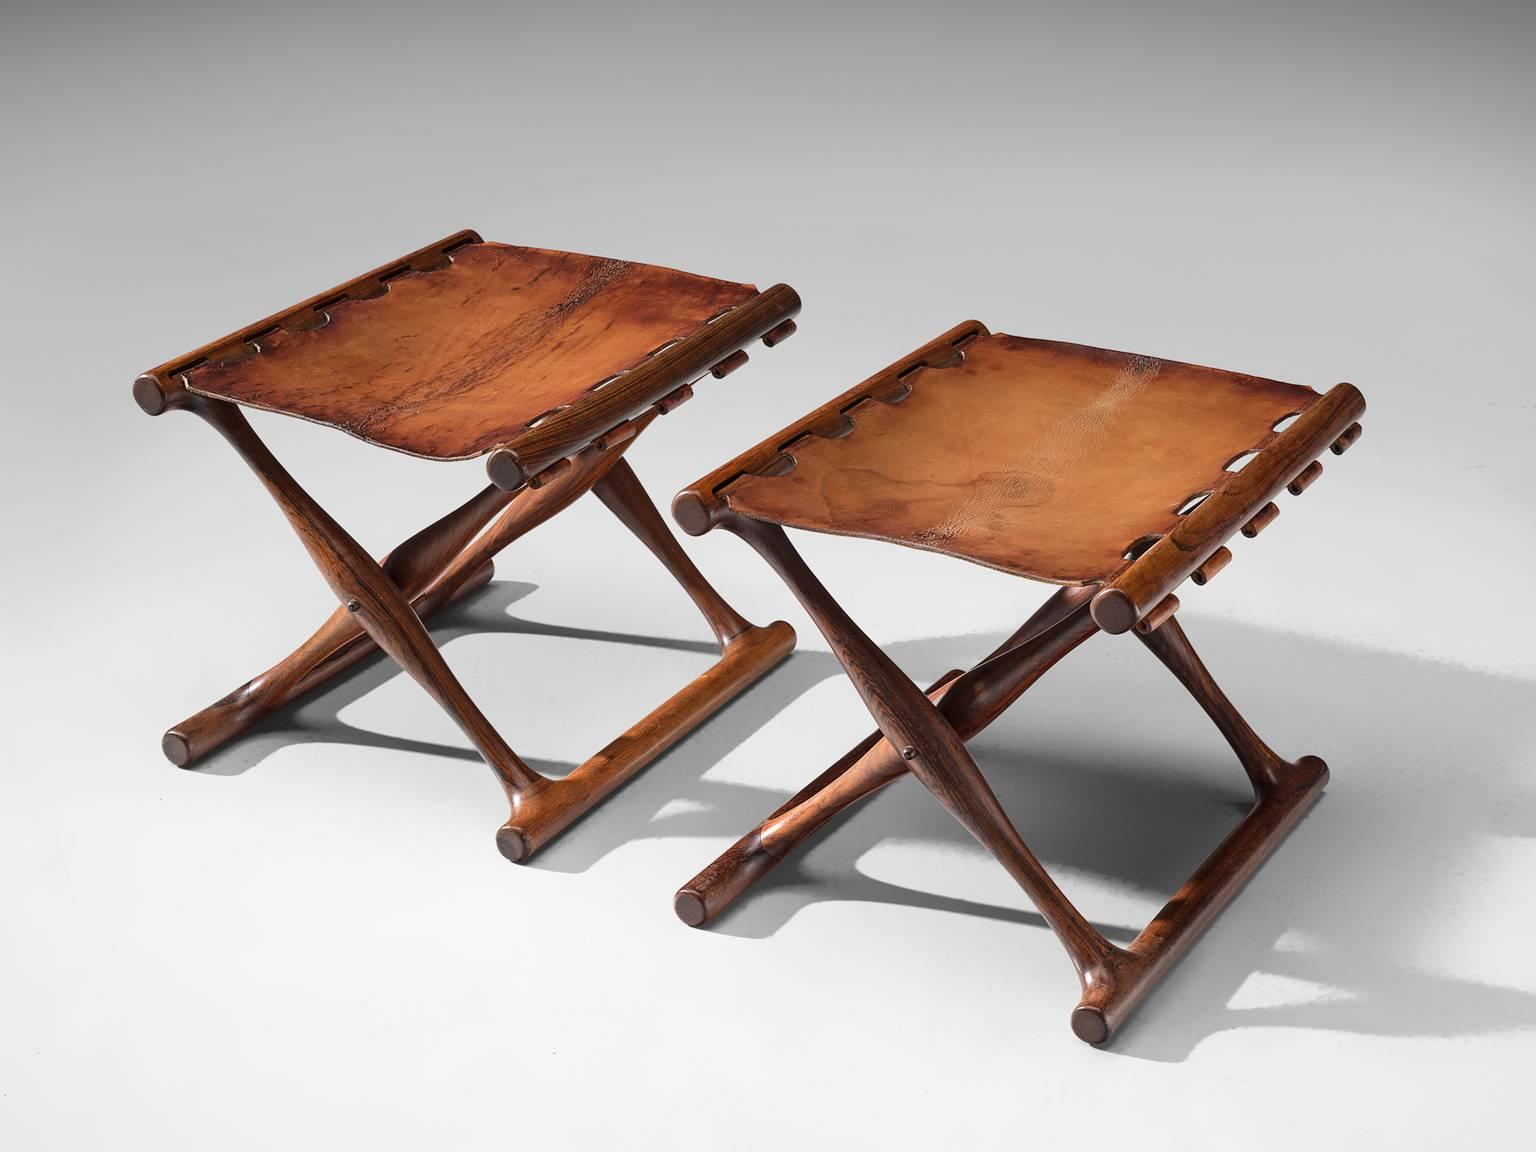 Poul Hundevad, PH43 stools 'Goldhøj', rosewood, cognac leather, Denmark, 1960s. 

This set of stools is designed and made by the Danish designer Poul Hundevad. The stools can be folded and are made of solid rosewood and high quality cognac leather